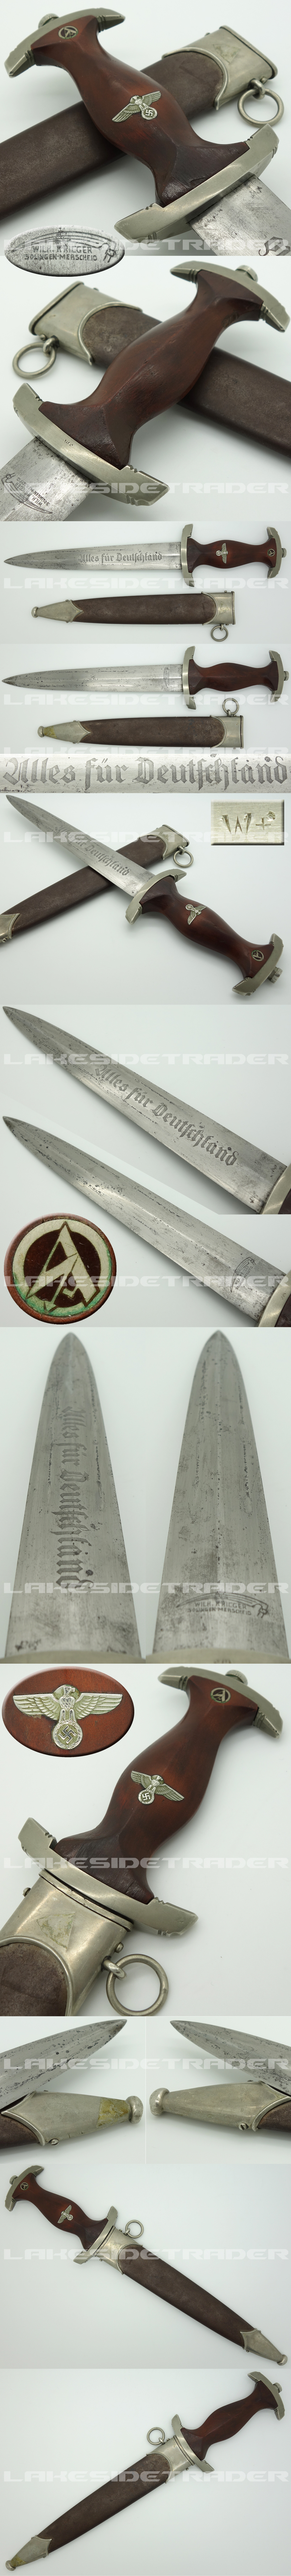 Rare Early SA Dagger by Wilh. Krieger